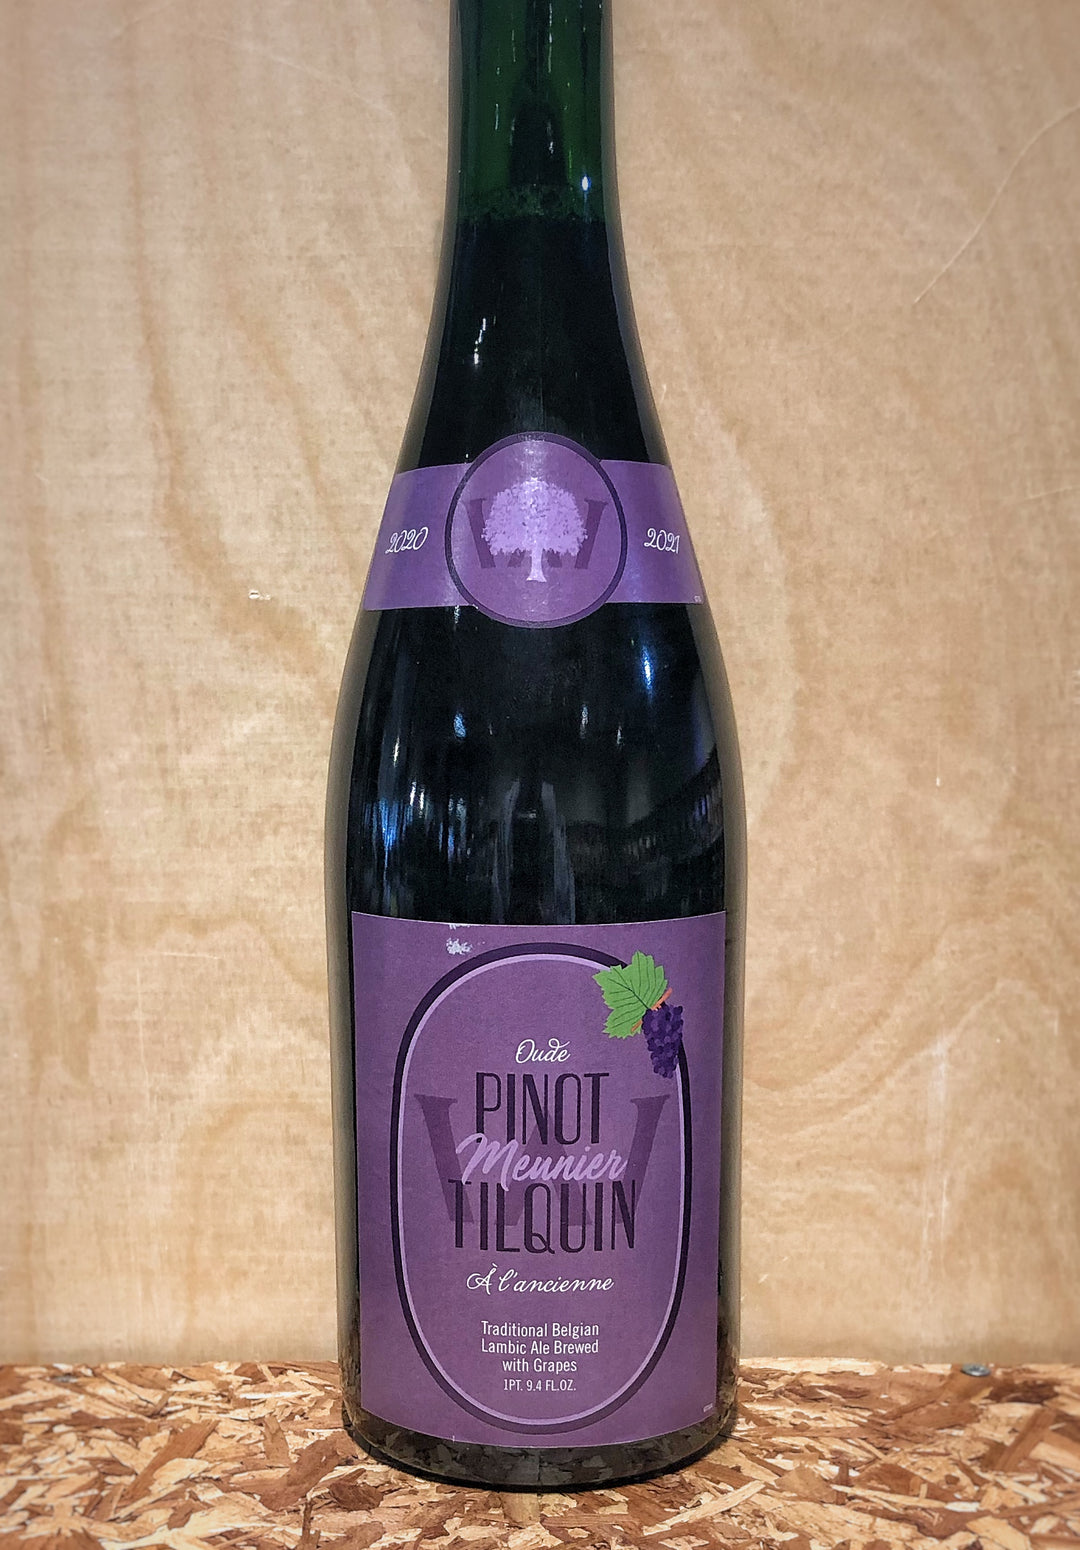 Oude Pinot Meunier Tilquin à L’Ancienne Traditional Belgian Lambic Ale brewed with Grapes (Rebecq, Belgium 2020-2021)